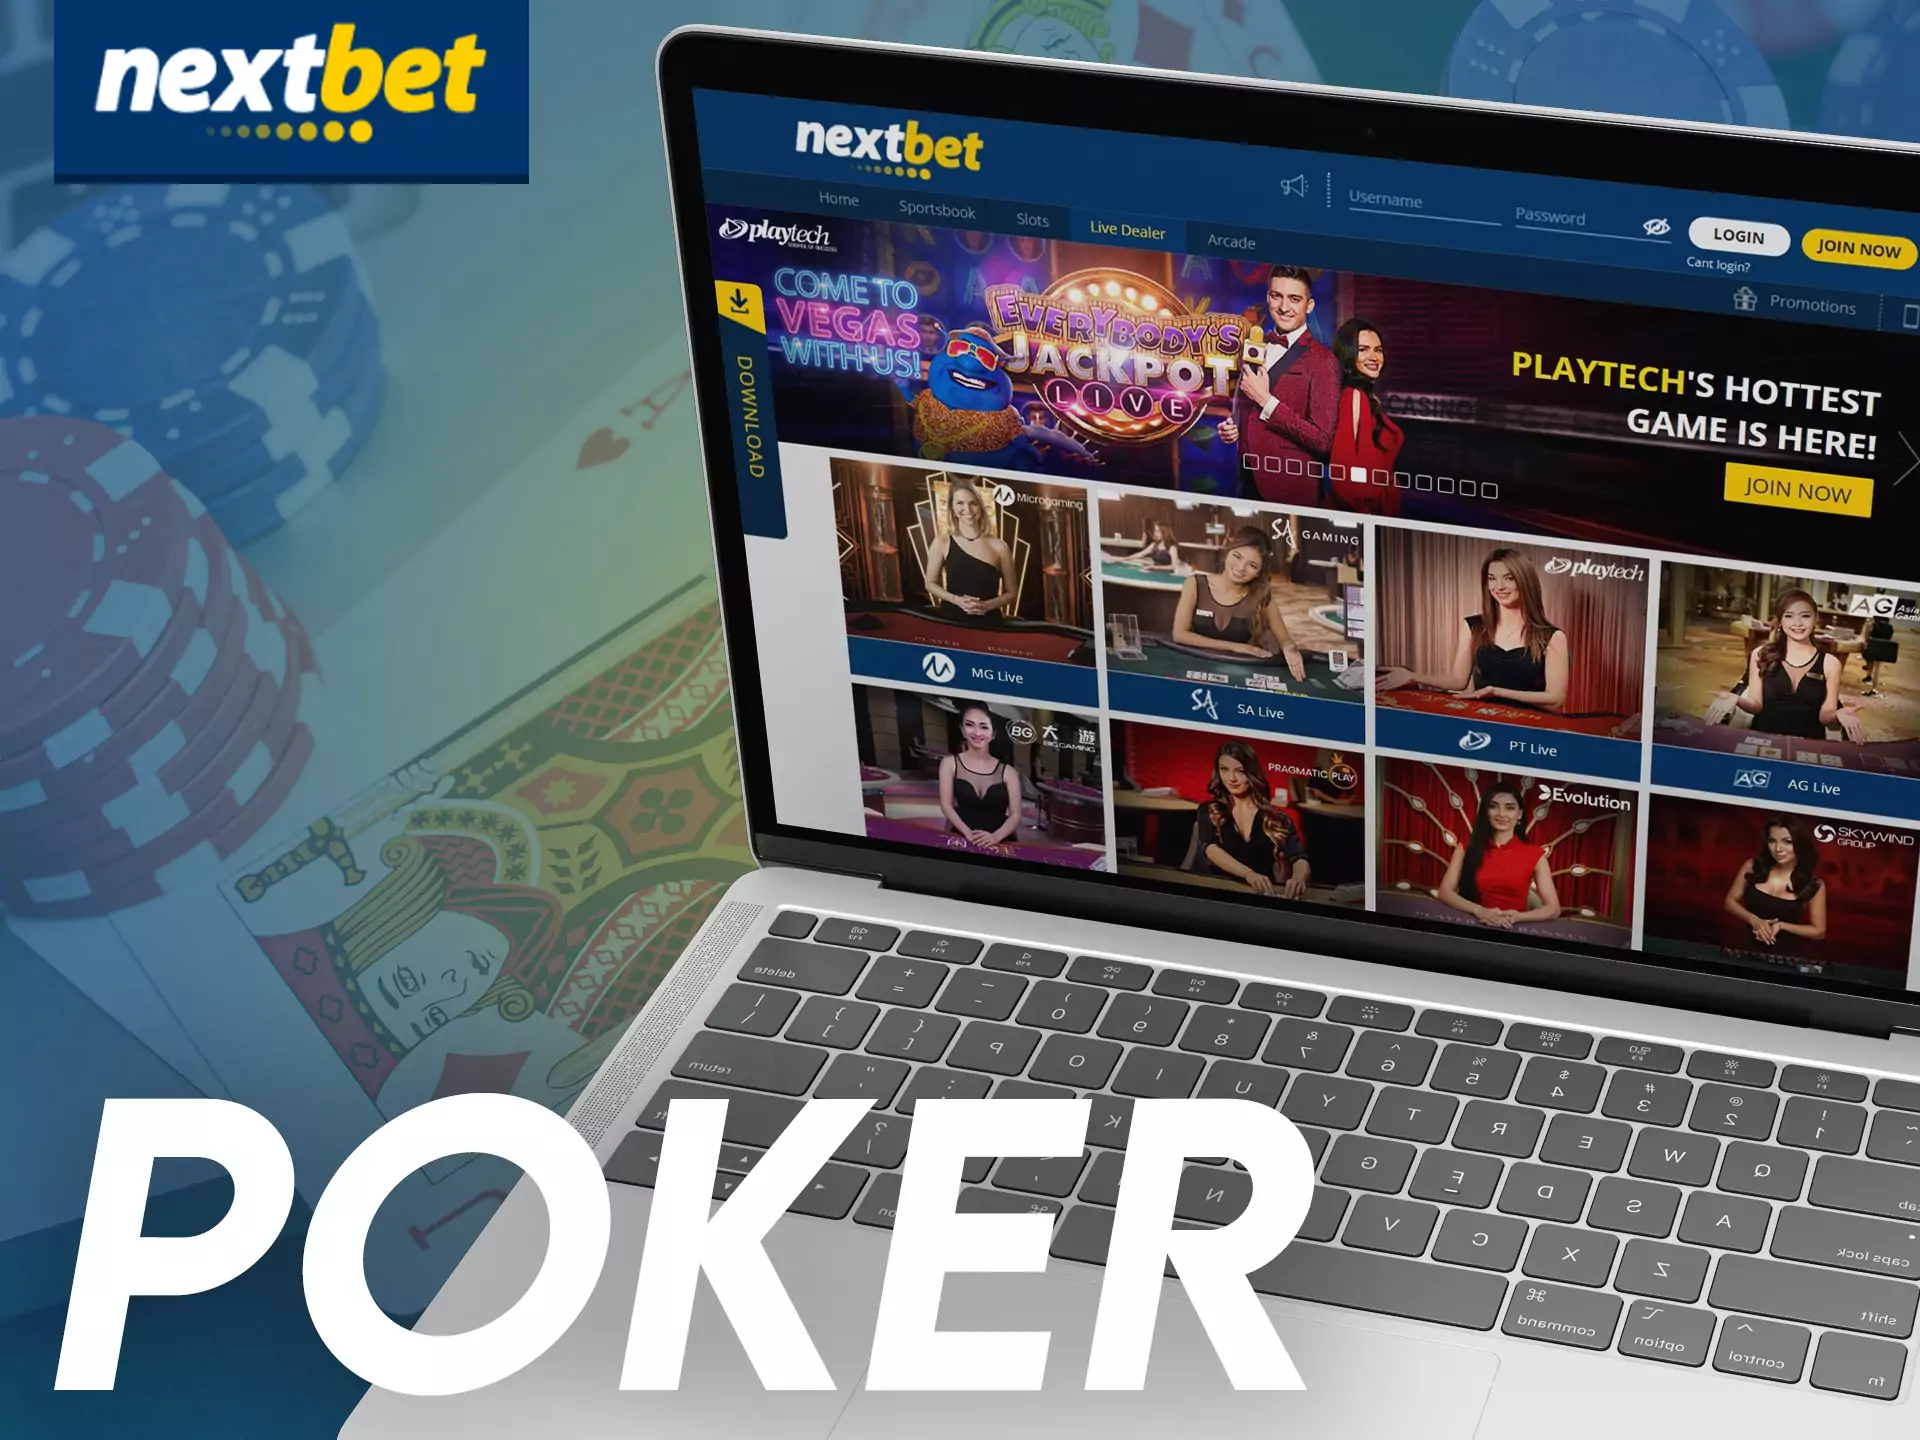 Try to play poker at Nextbet Casino.